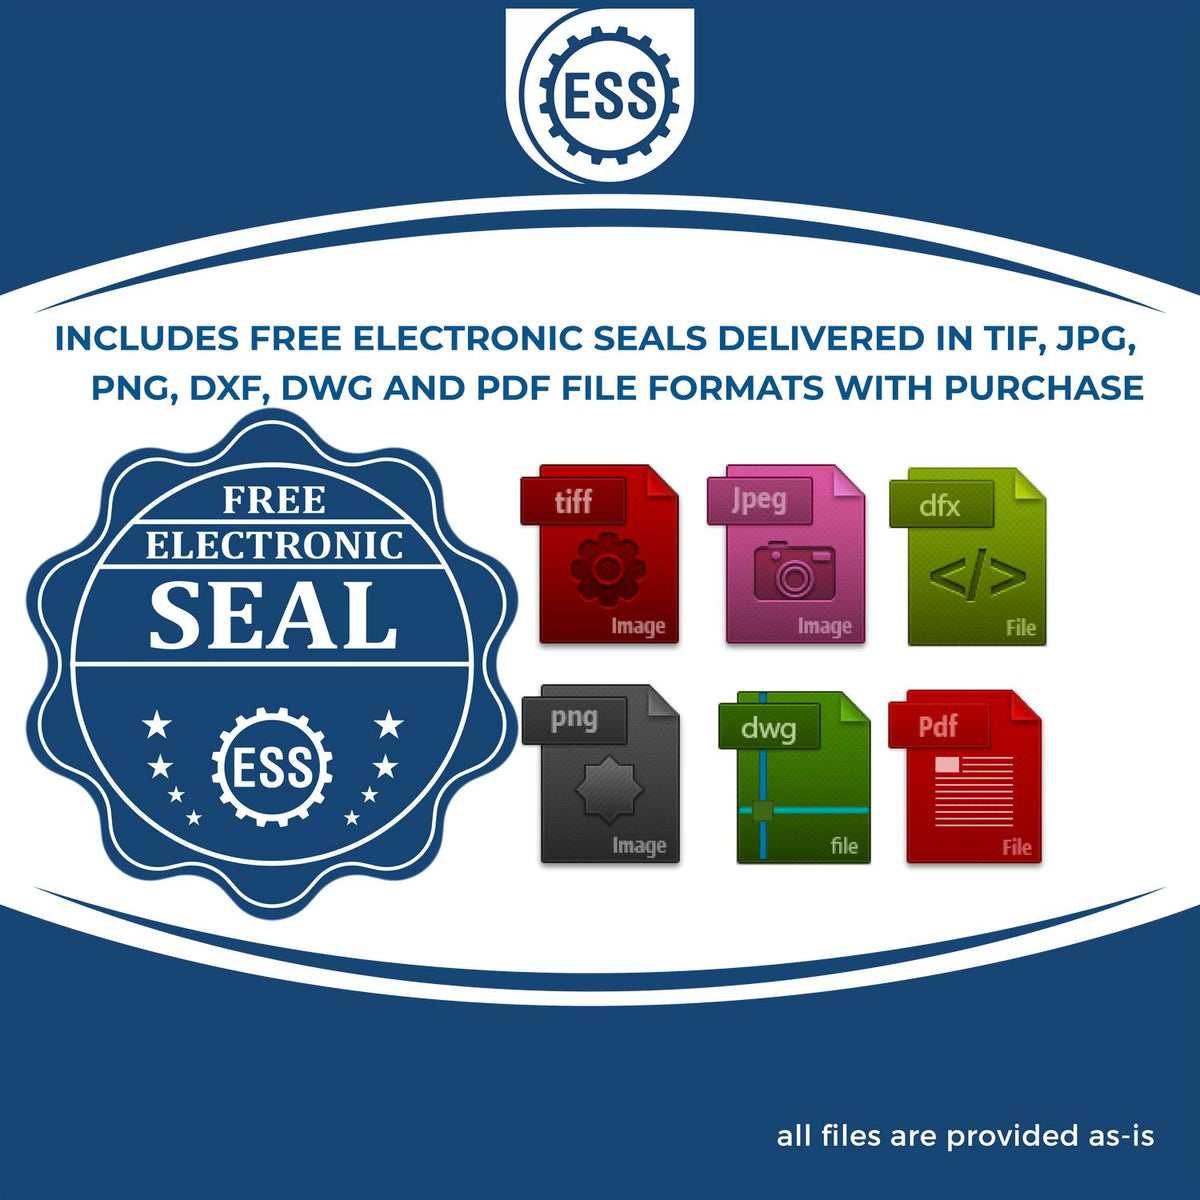 An infographic for the free electronic seal for the Soft Michigan Professional Geologist Seal illustrating the different file type icons such as DXF, DWG, TIF, JPG and PNG.